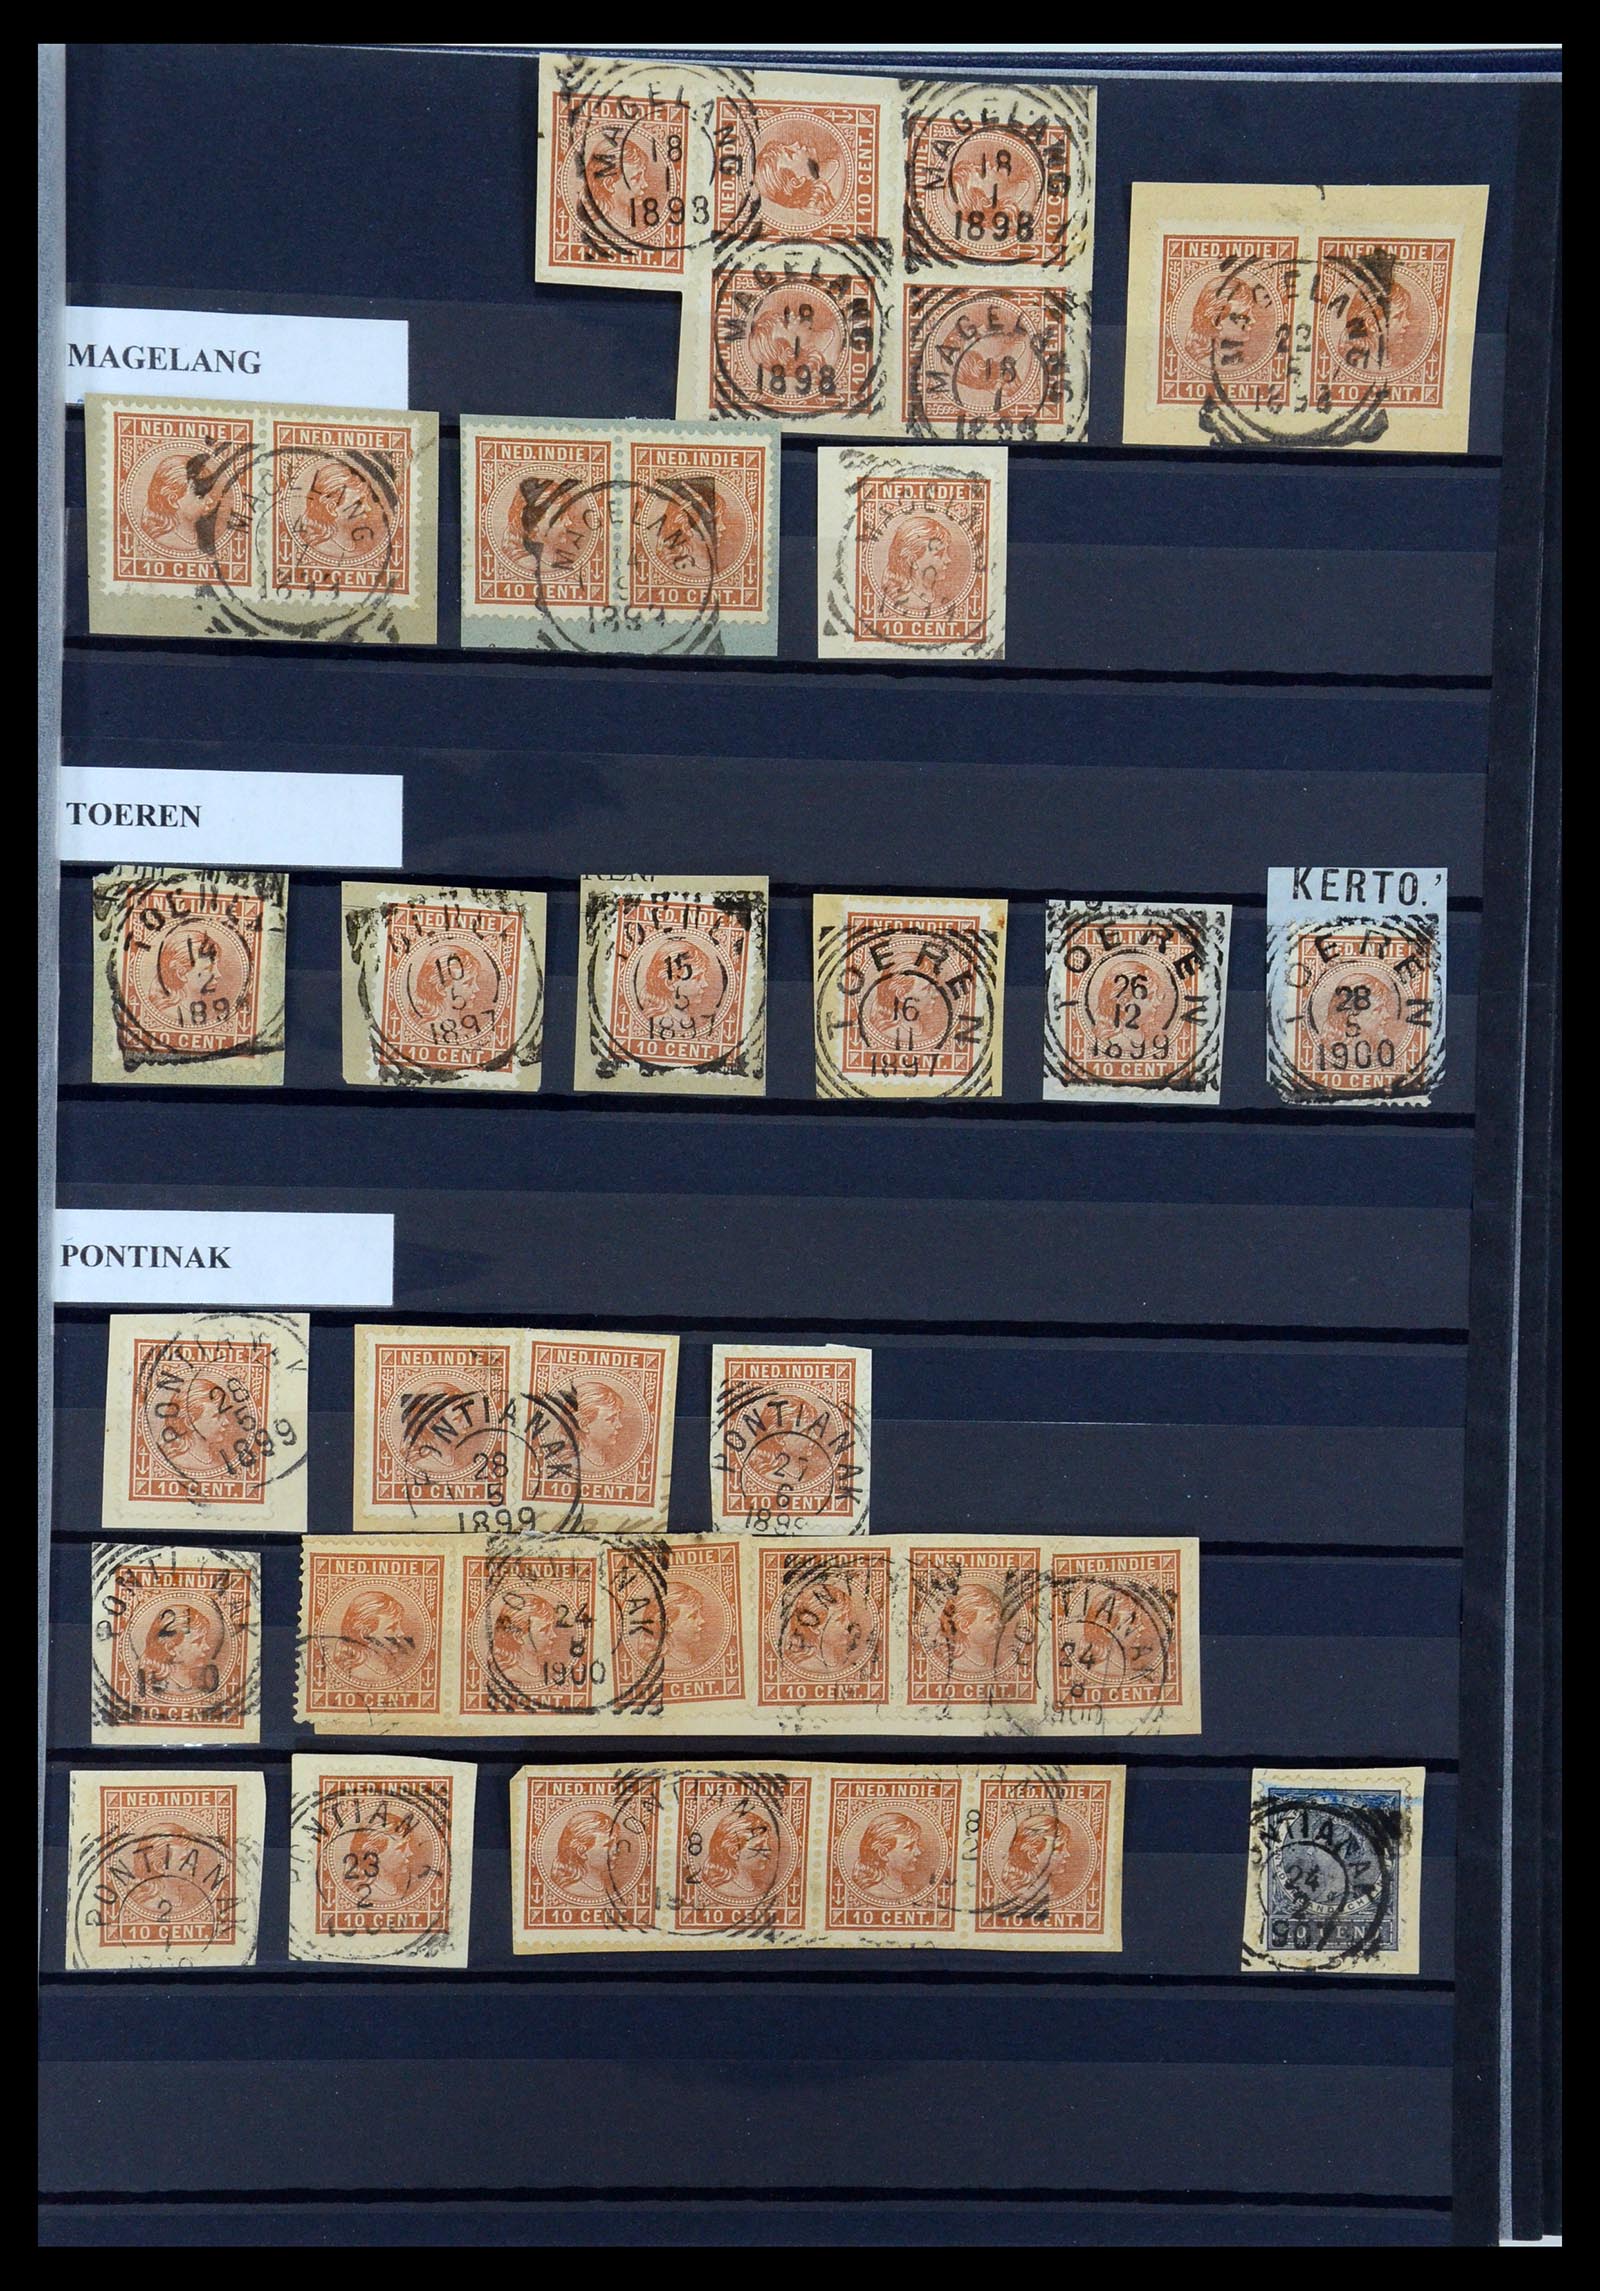 35612 040 - Stamp Collection 35612 Dutch east Indies cancels.